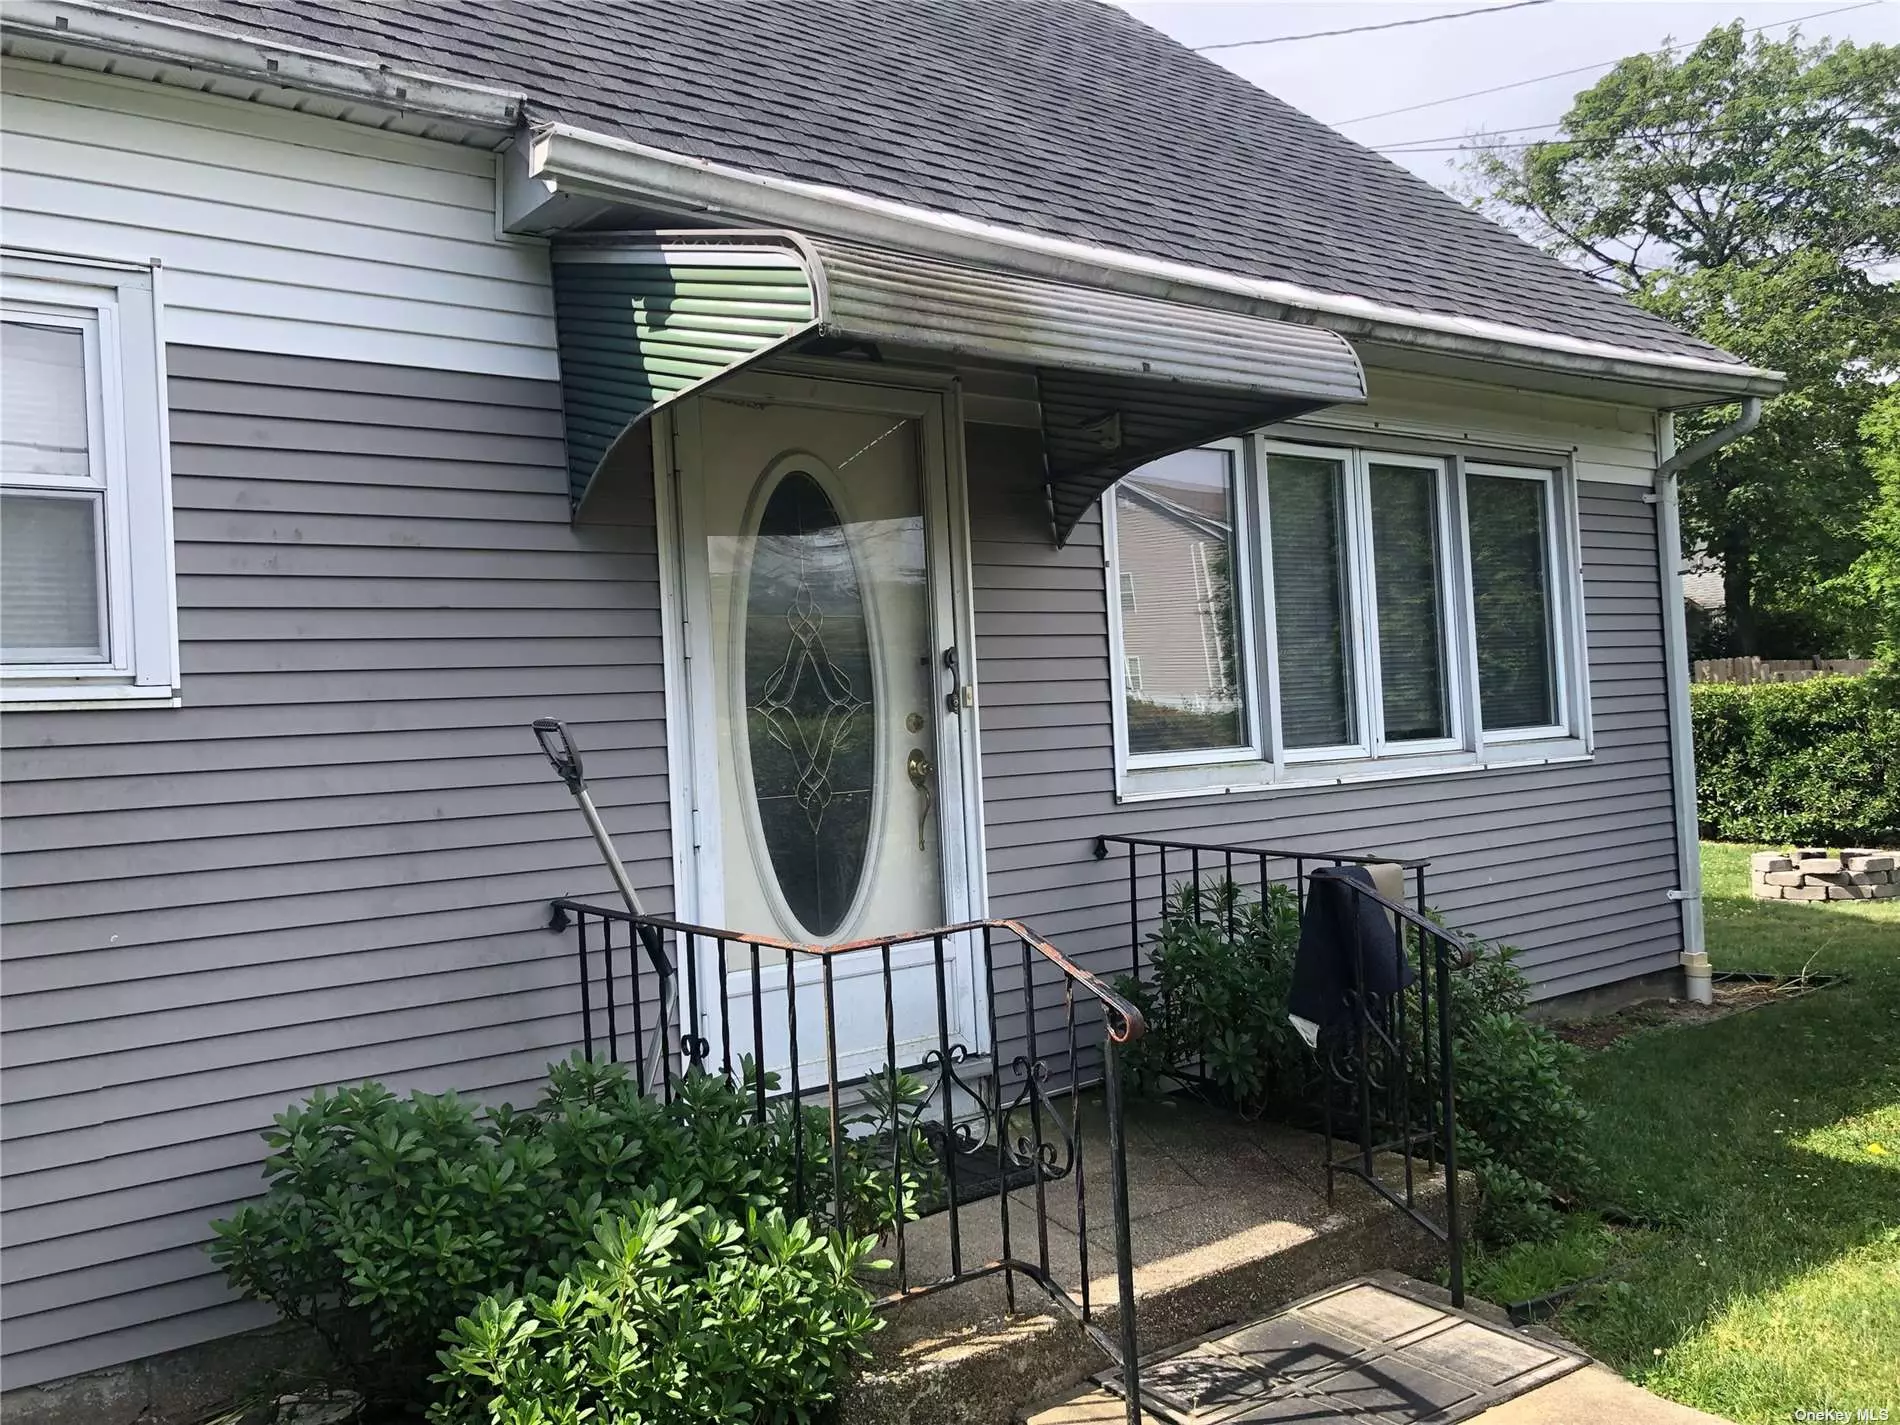 Full house rental close to Babylon RR and town. 2 Br, 1full bath, EIK, living room and beautiful yard. 1 car detached garage to park cars. Washer/Dryer hook up. Plenty of storage. All applications thru NTN.